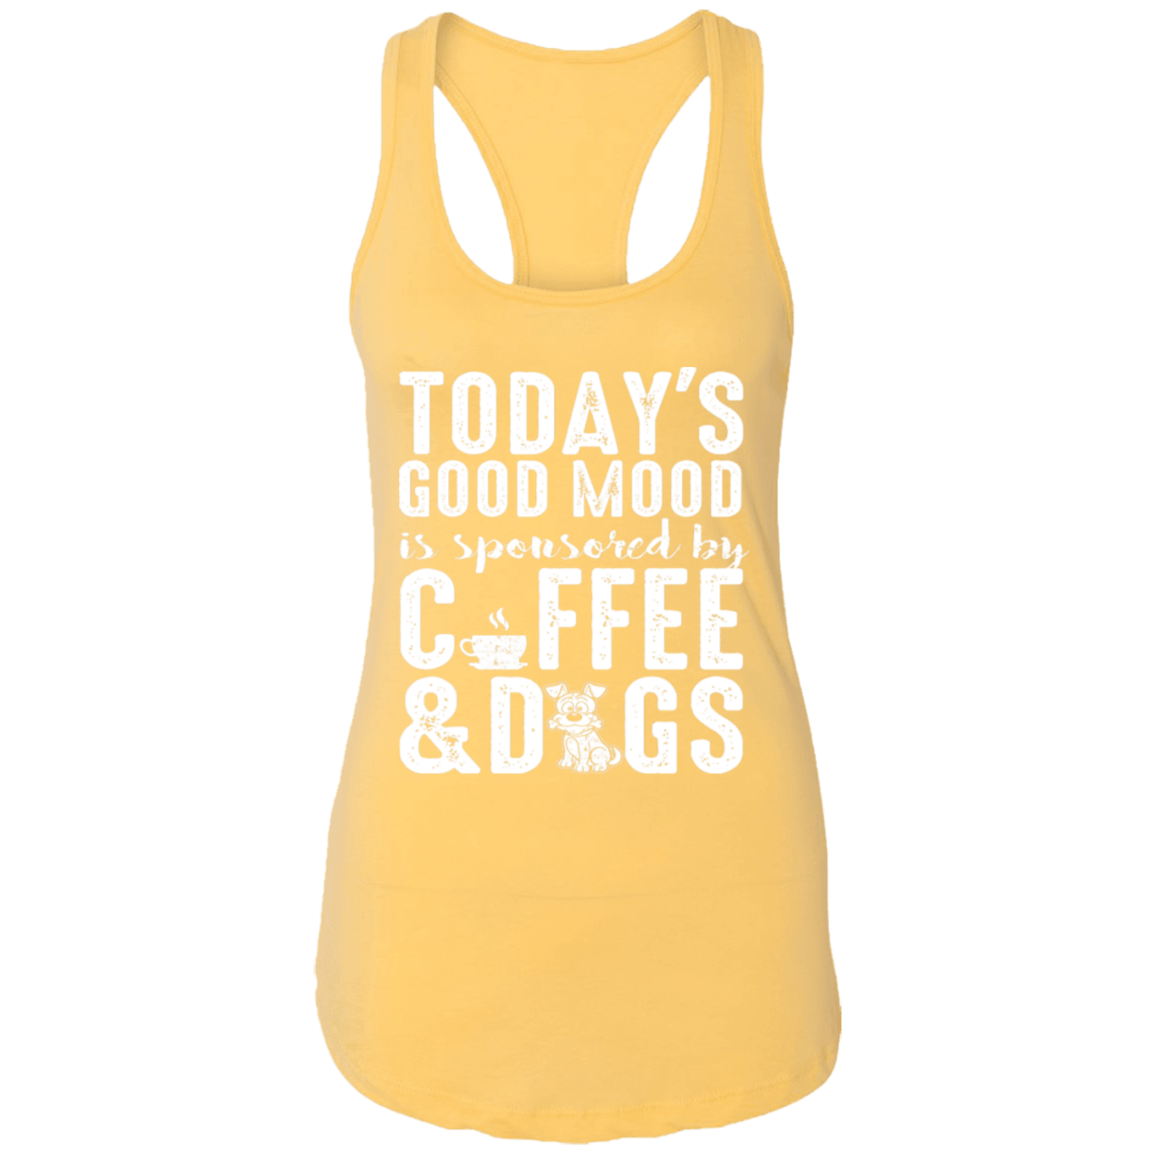 Today's Good Mood Coffee & Dogs - Ladies Racer Back Tank.